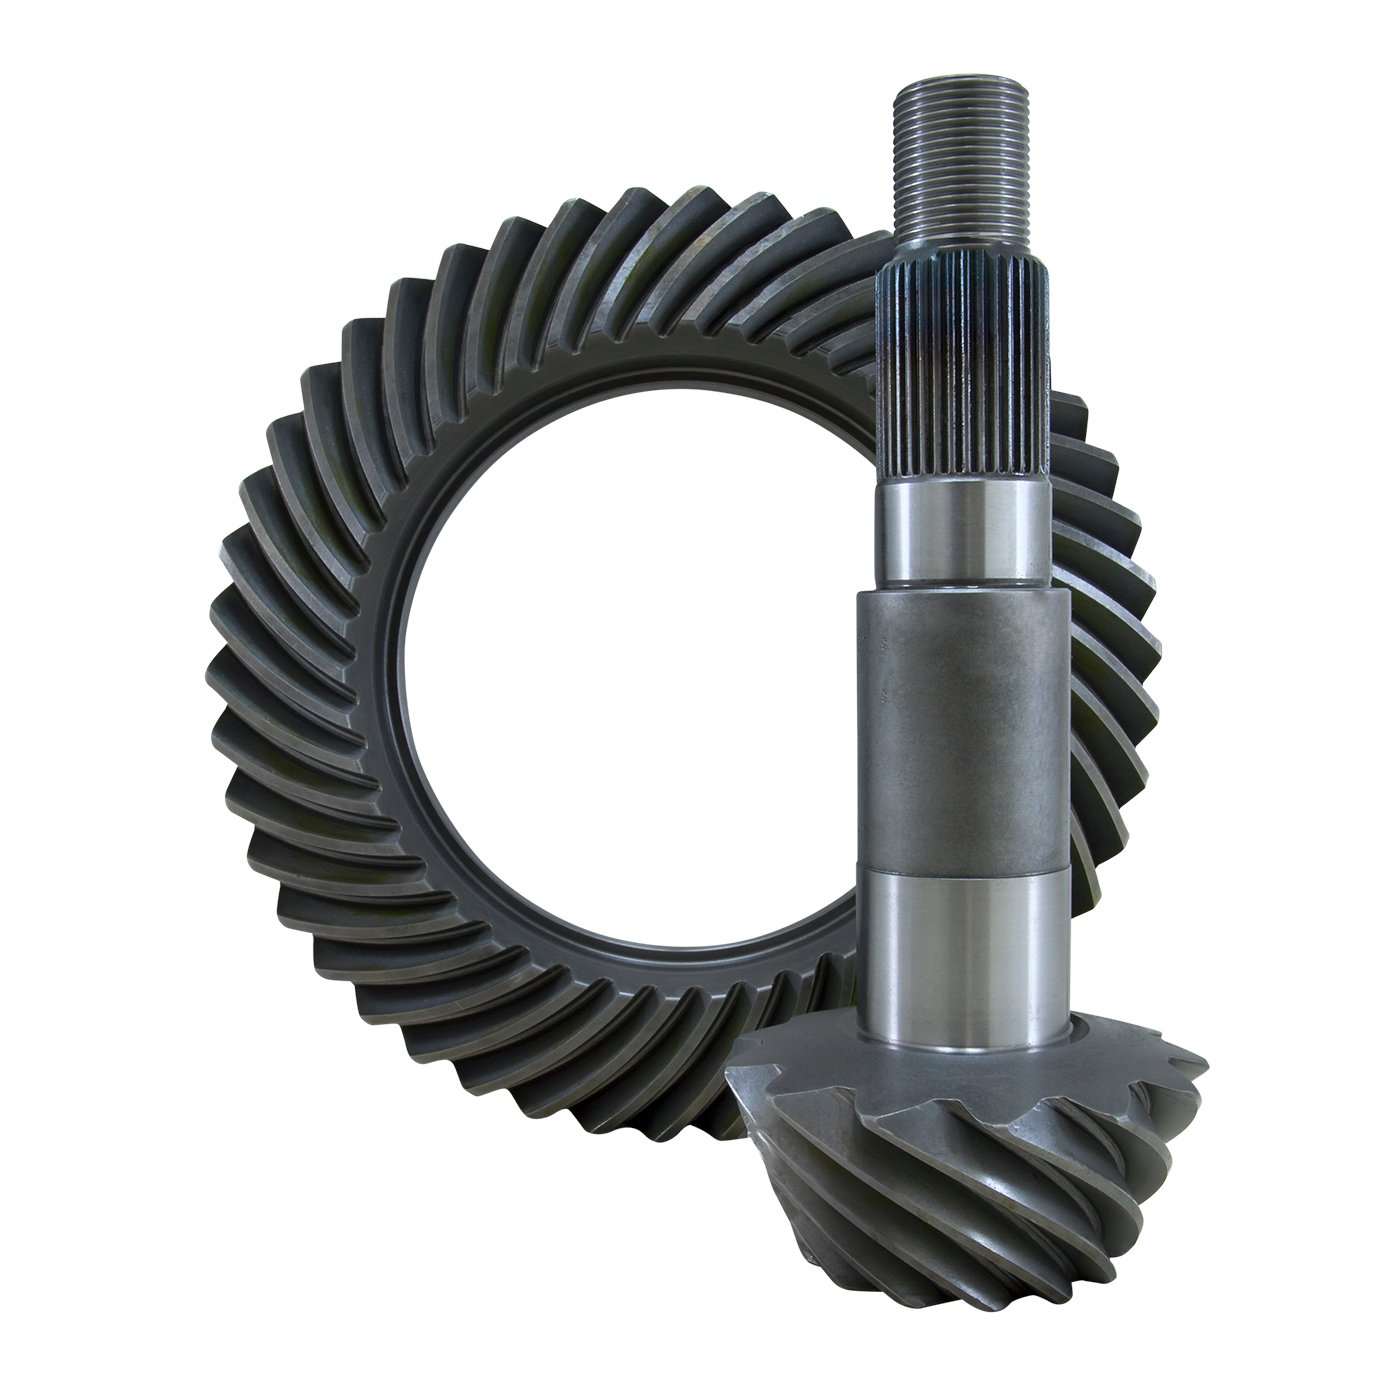 USA Standard ZG D80-513 Replacement Ring & Pinion Gear Set, For Dana 80, 5.13 Ratio